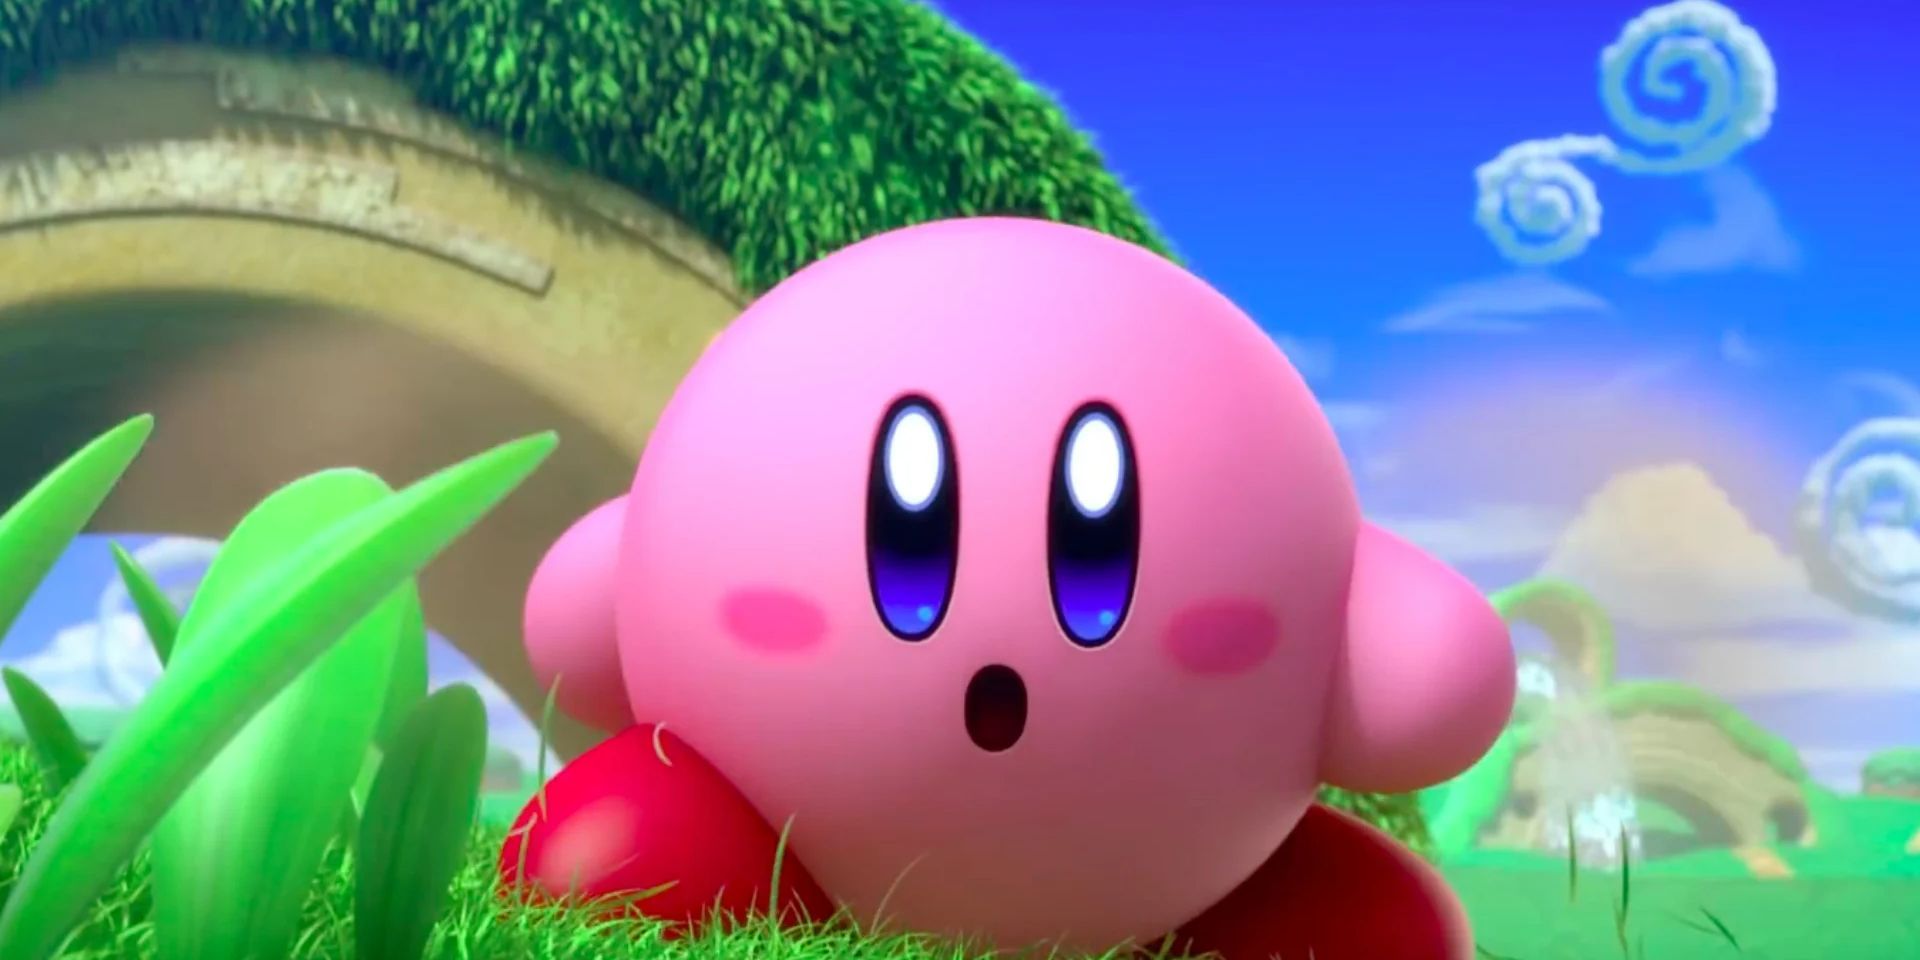 Kirby as seen in a cinematic of Kirby and the forgotten land